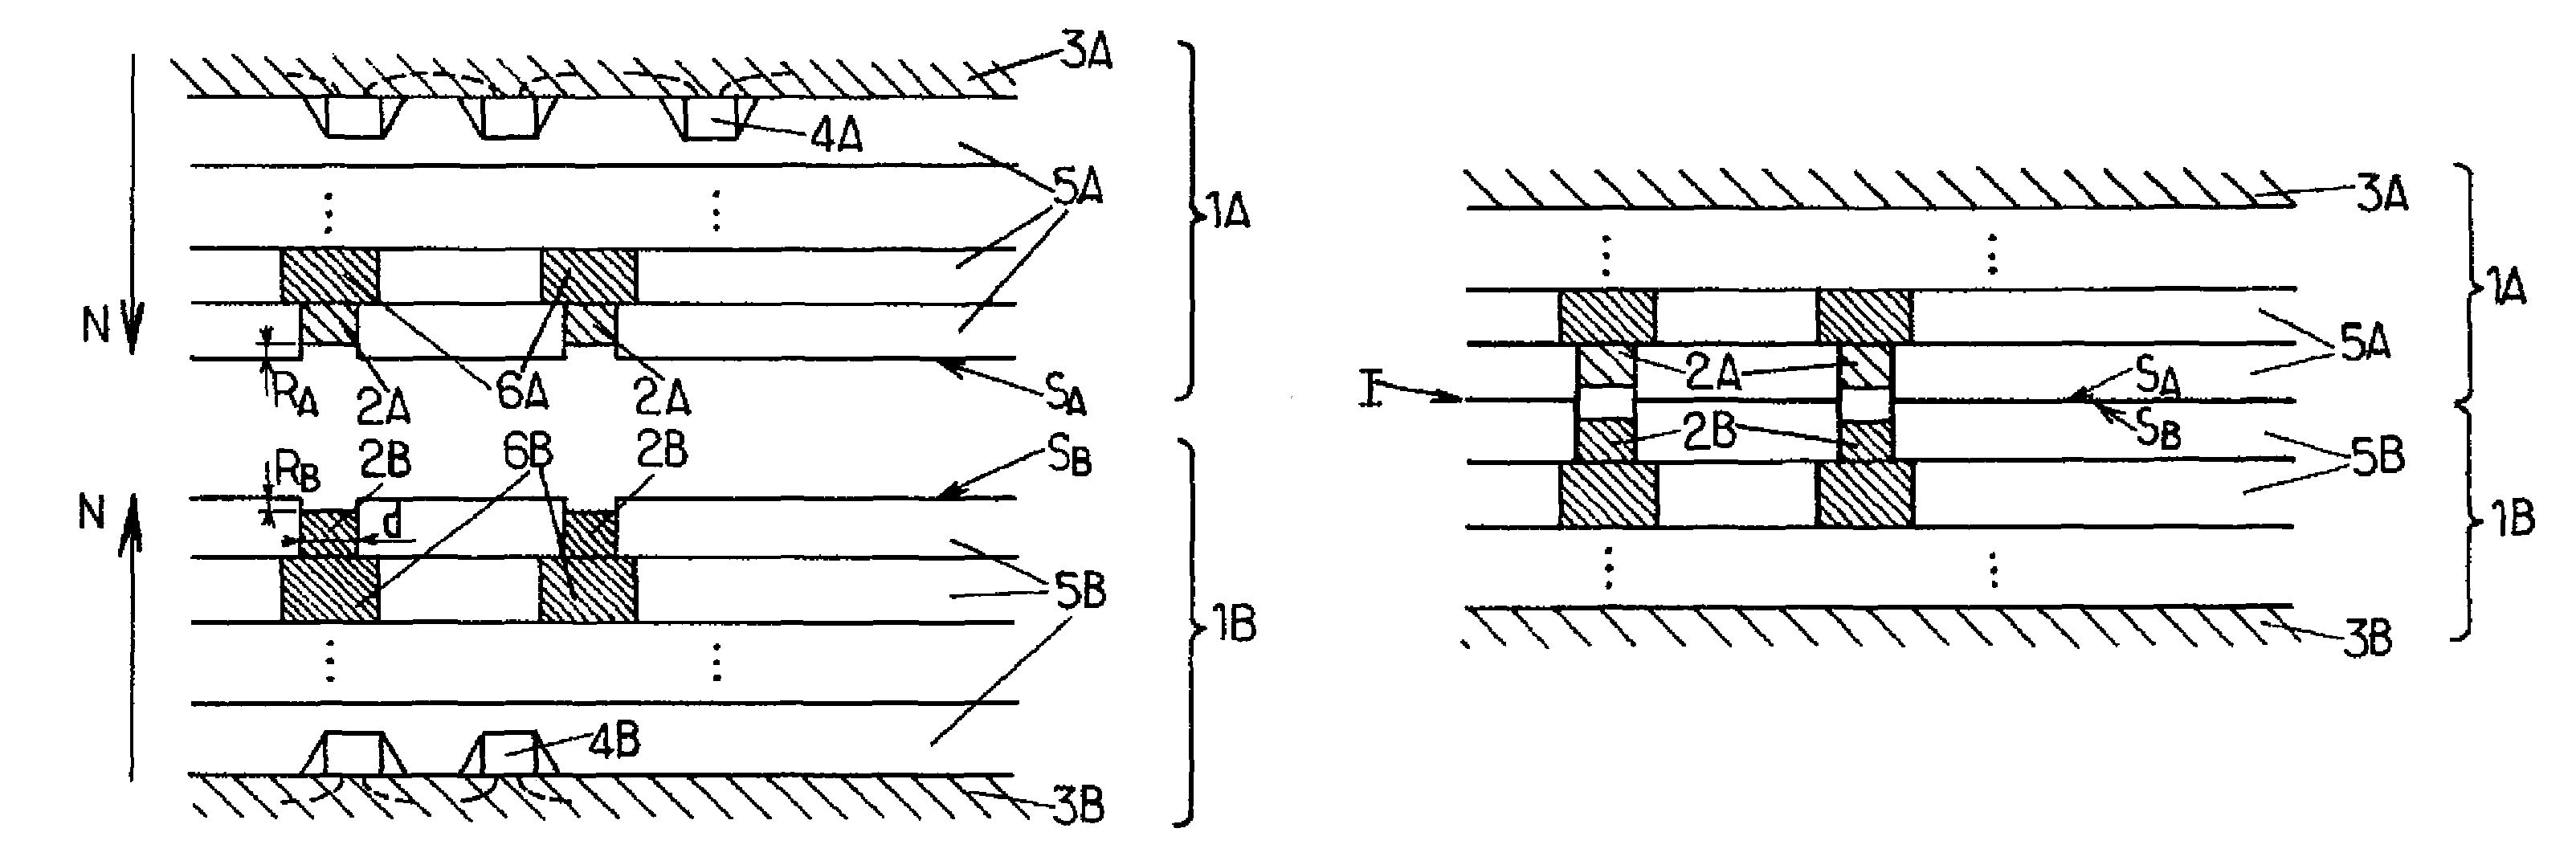 Assembly of two parts of an integrated electronic circuit